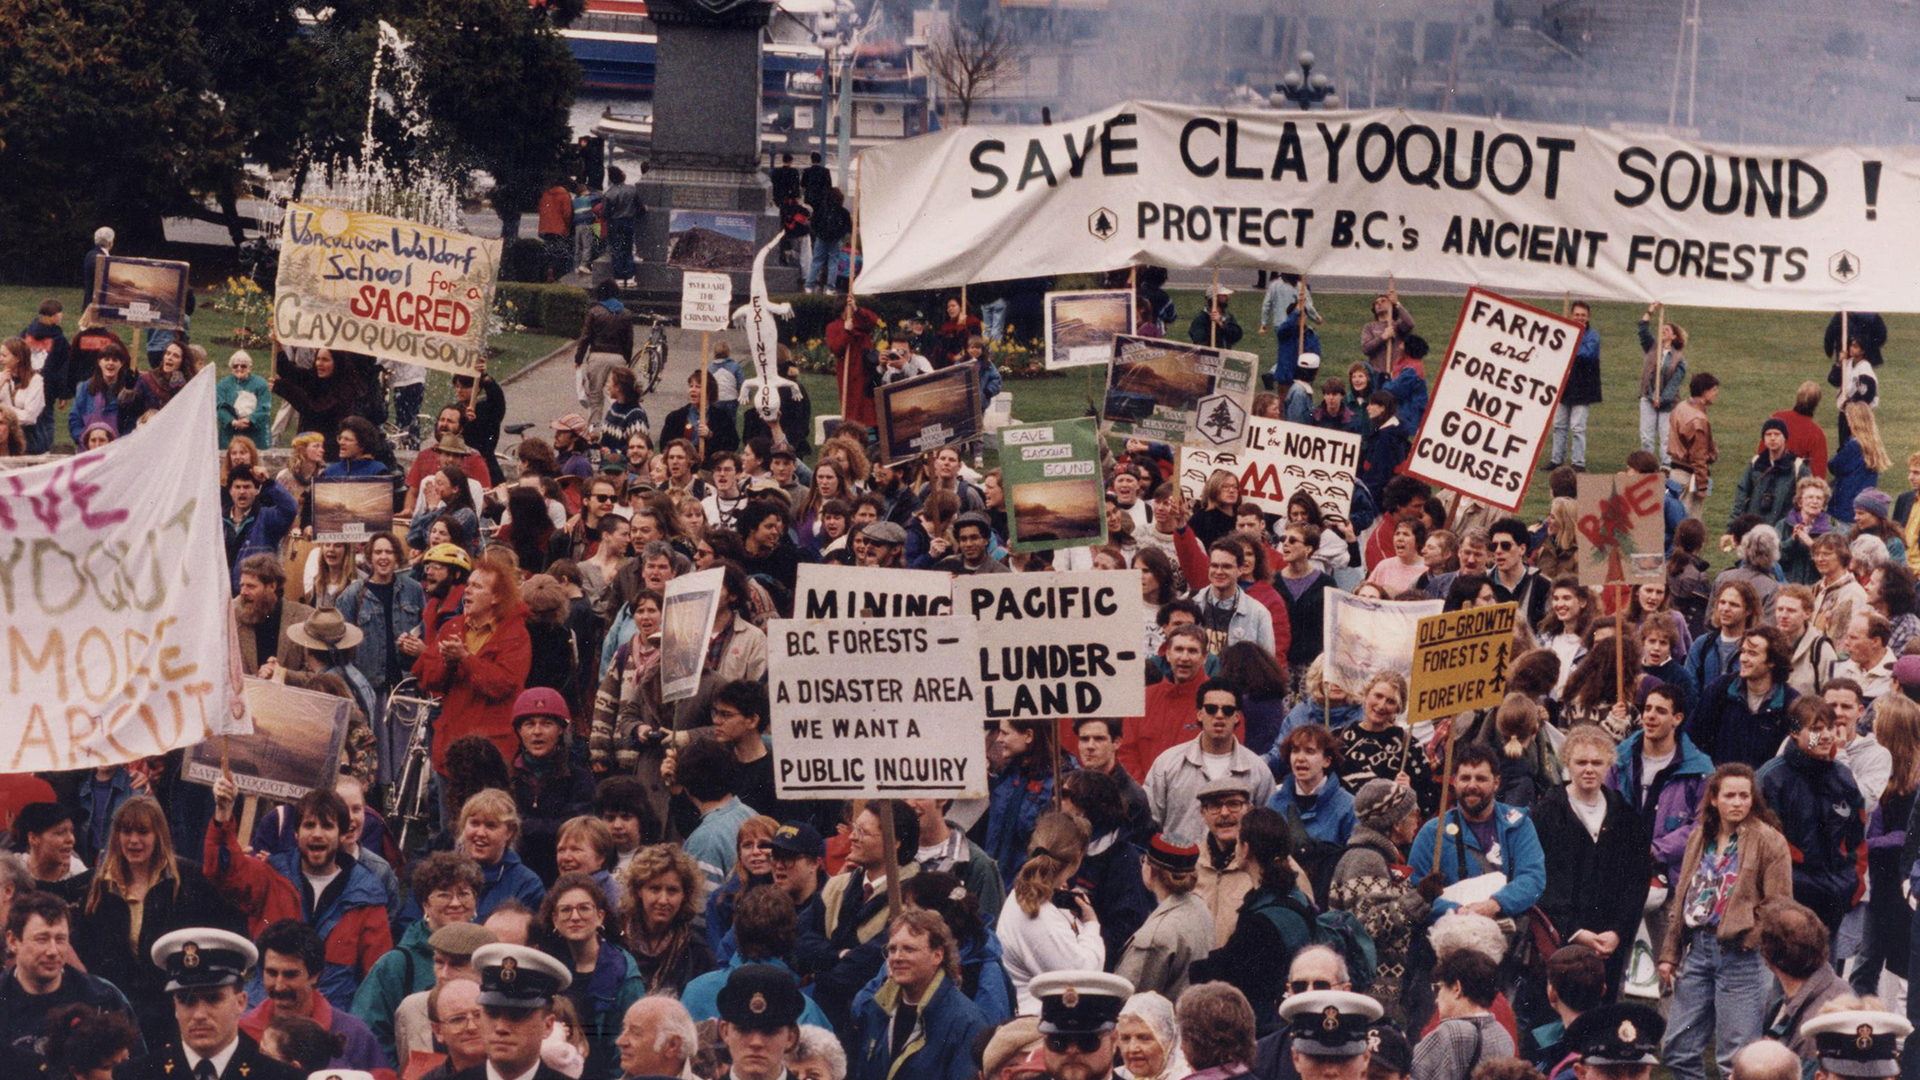 A protest to protect the forests of Clayoquot Sound, BC takes place in Victoria in March 1993. A large group of people holding signs and banners gather outdoors. 